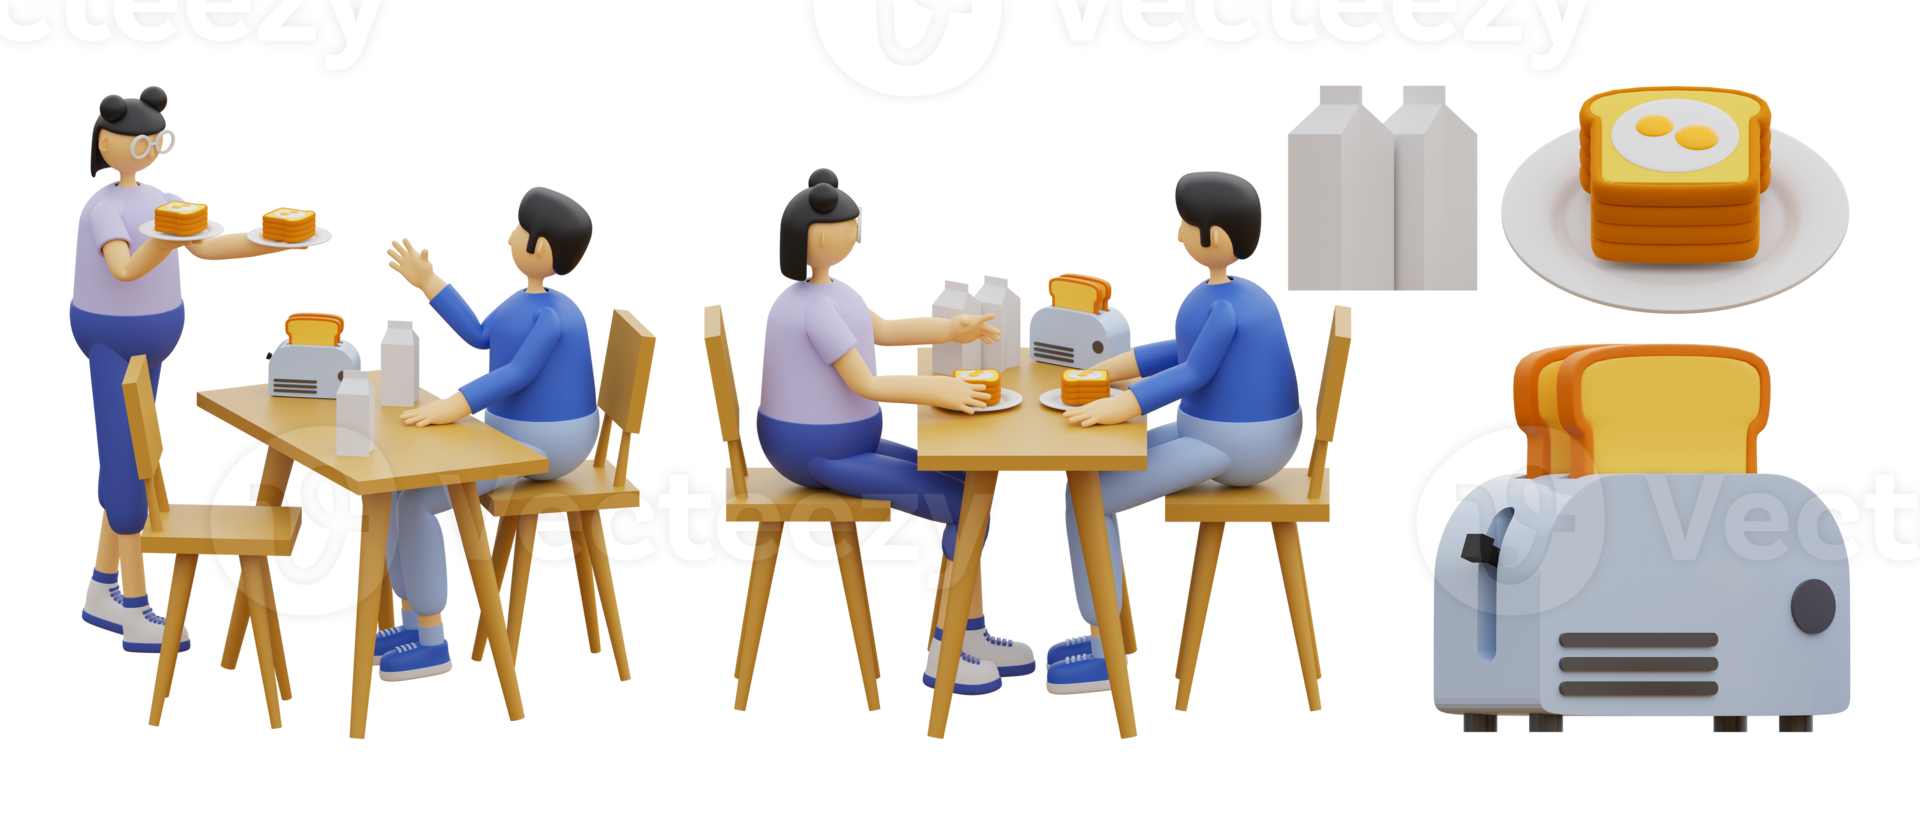 breakfast woman and man illustration 3d set png